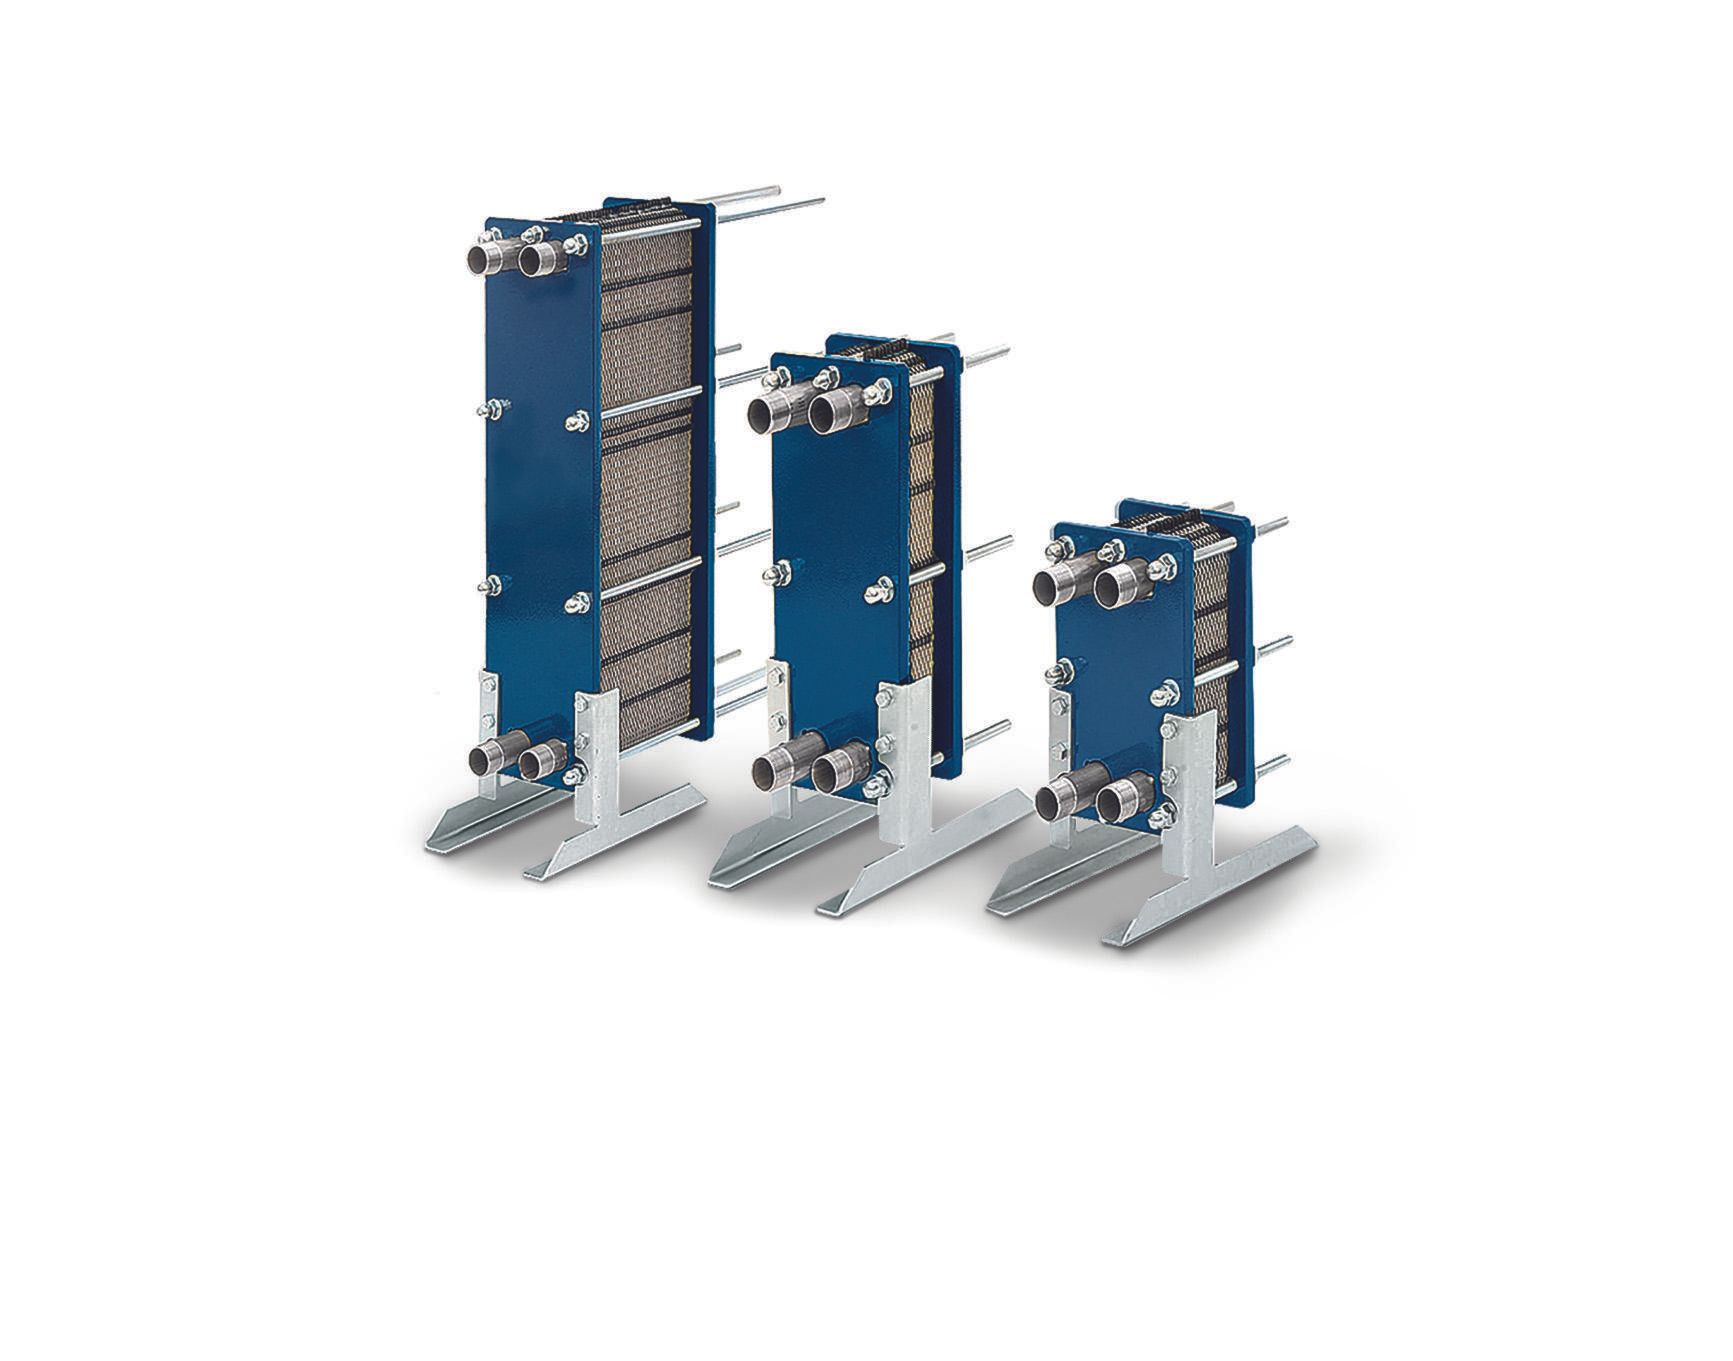 Thermic Leisure heat exchangers are manufactured from 95% recycled materials